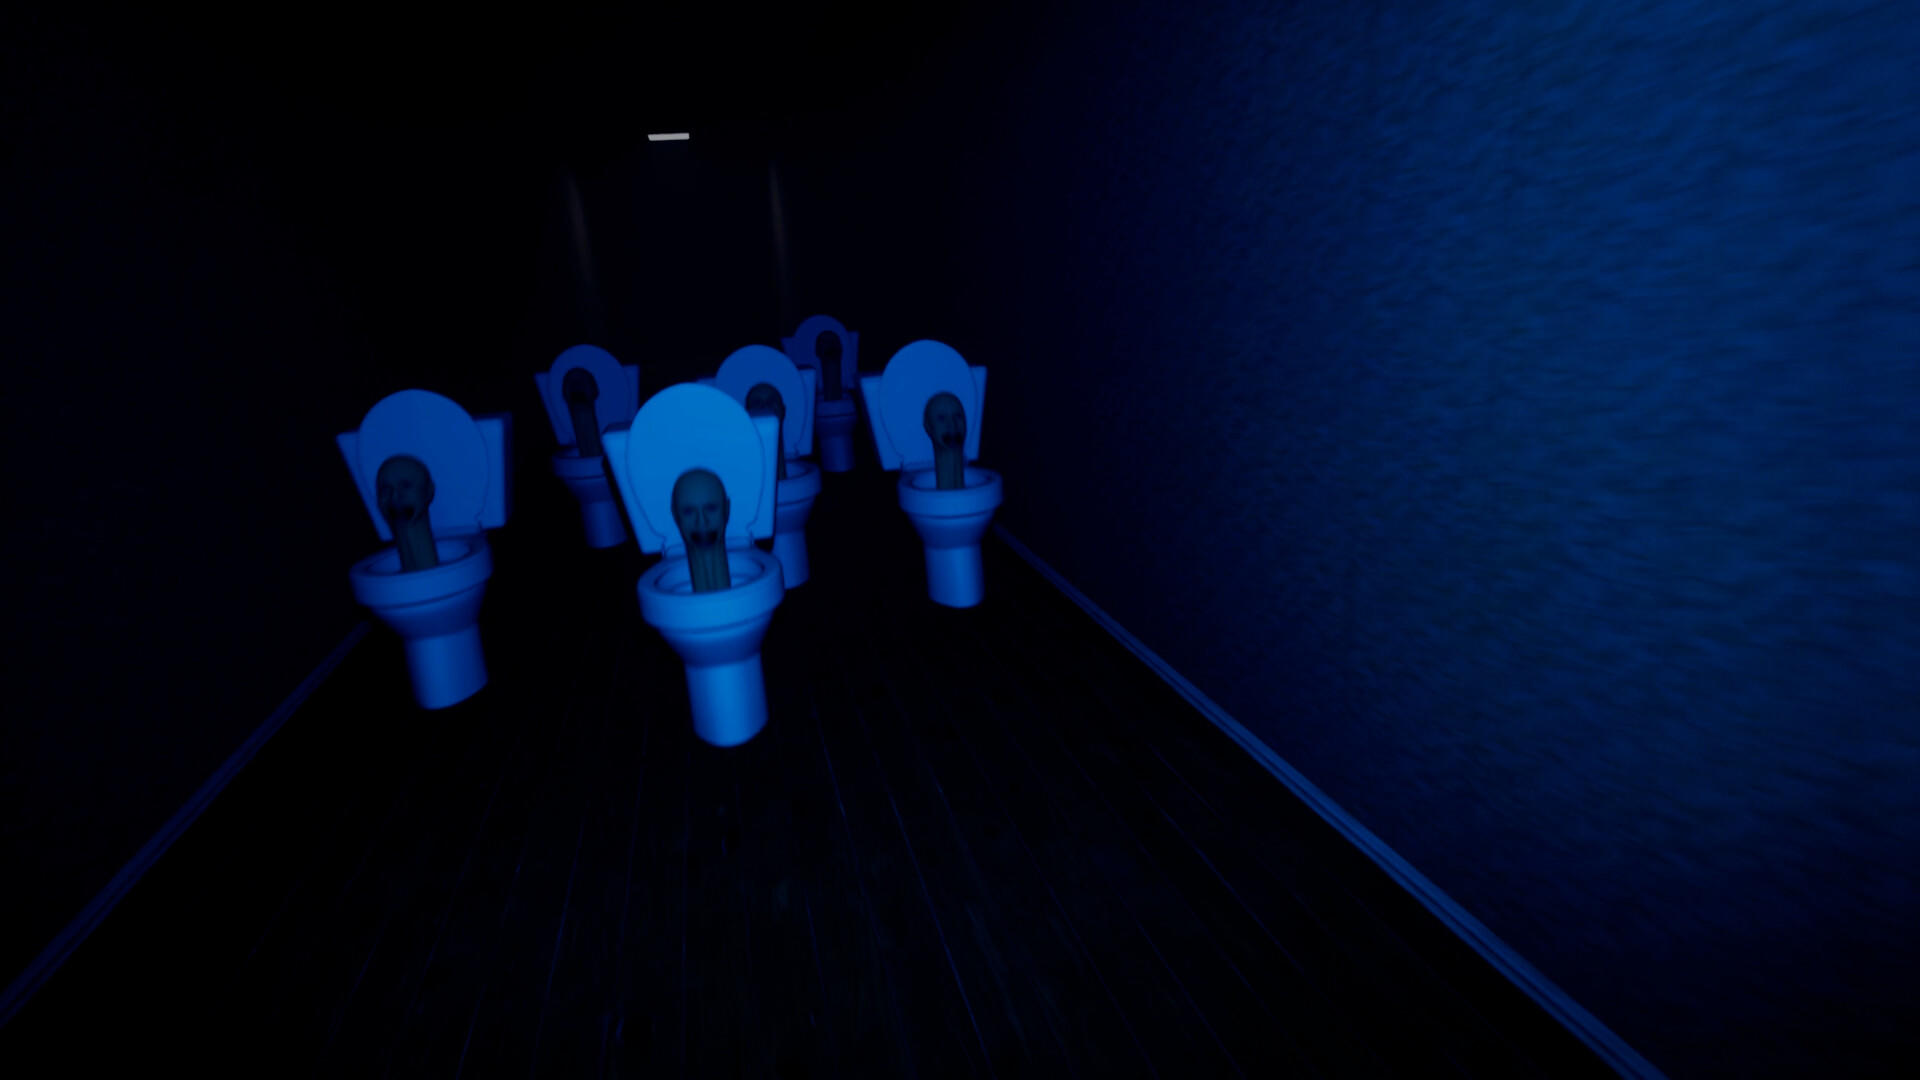 ESCAPE FROM TOILETS screenshot game